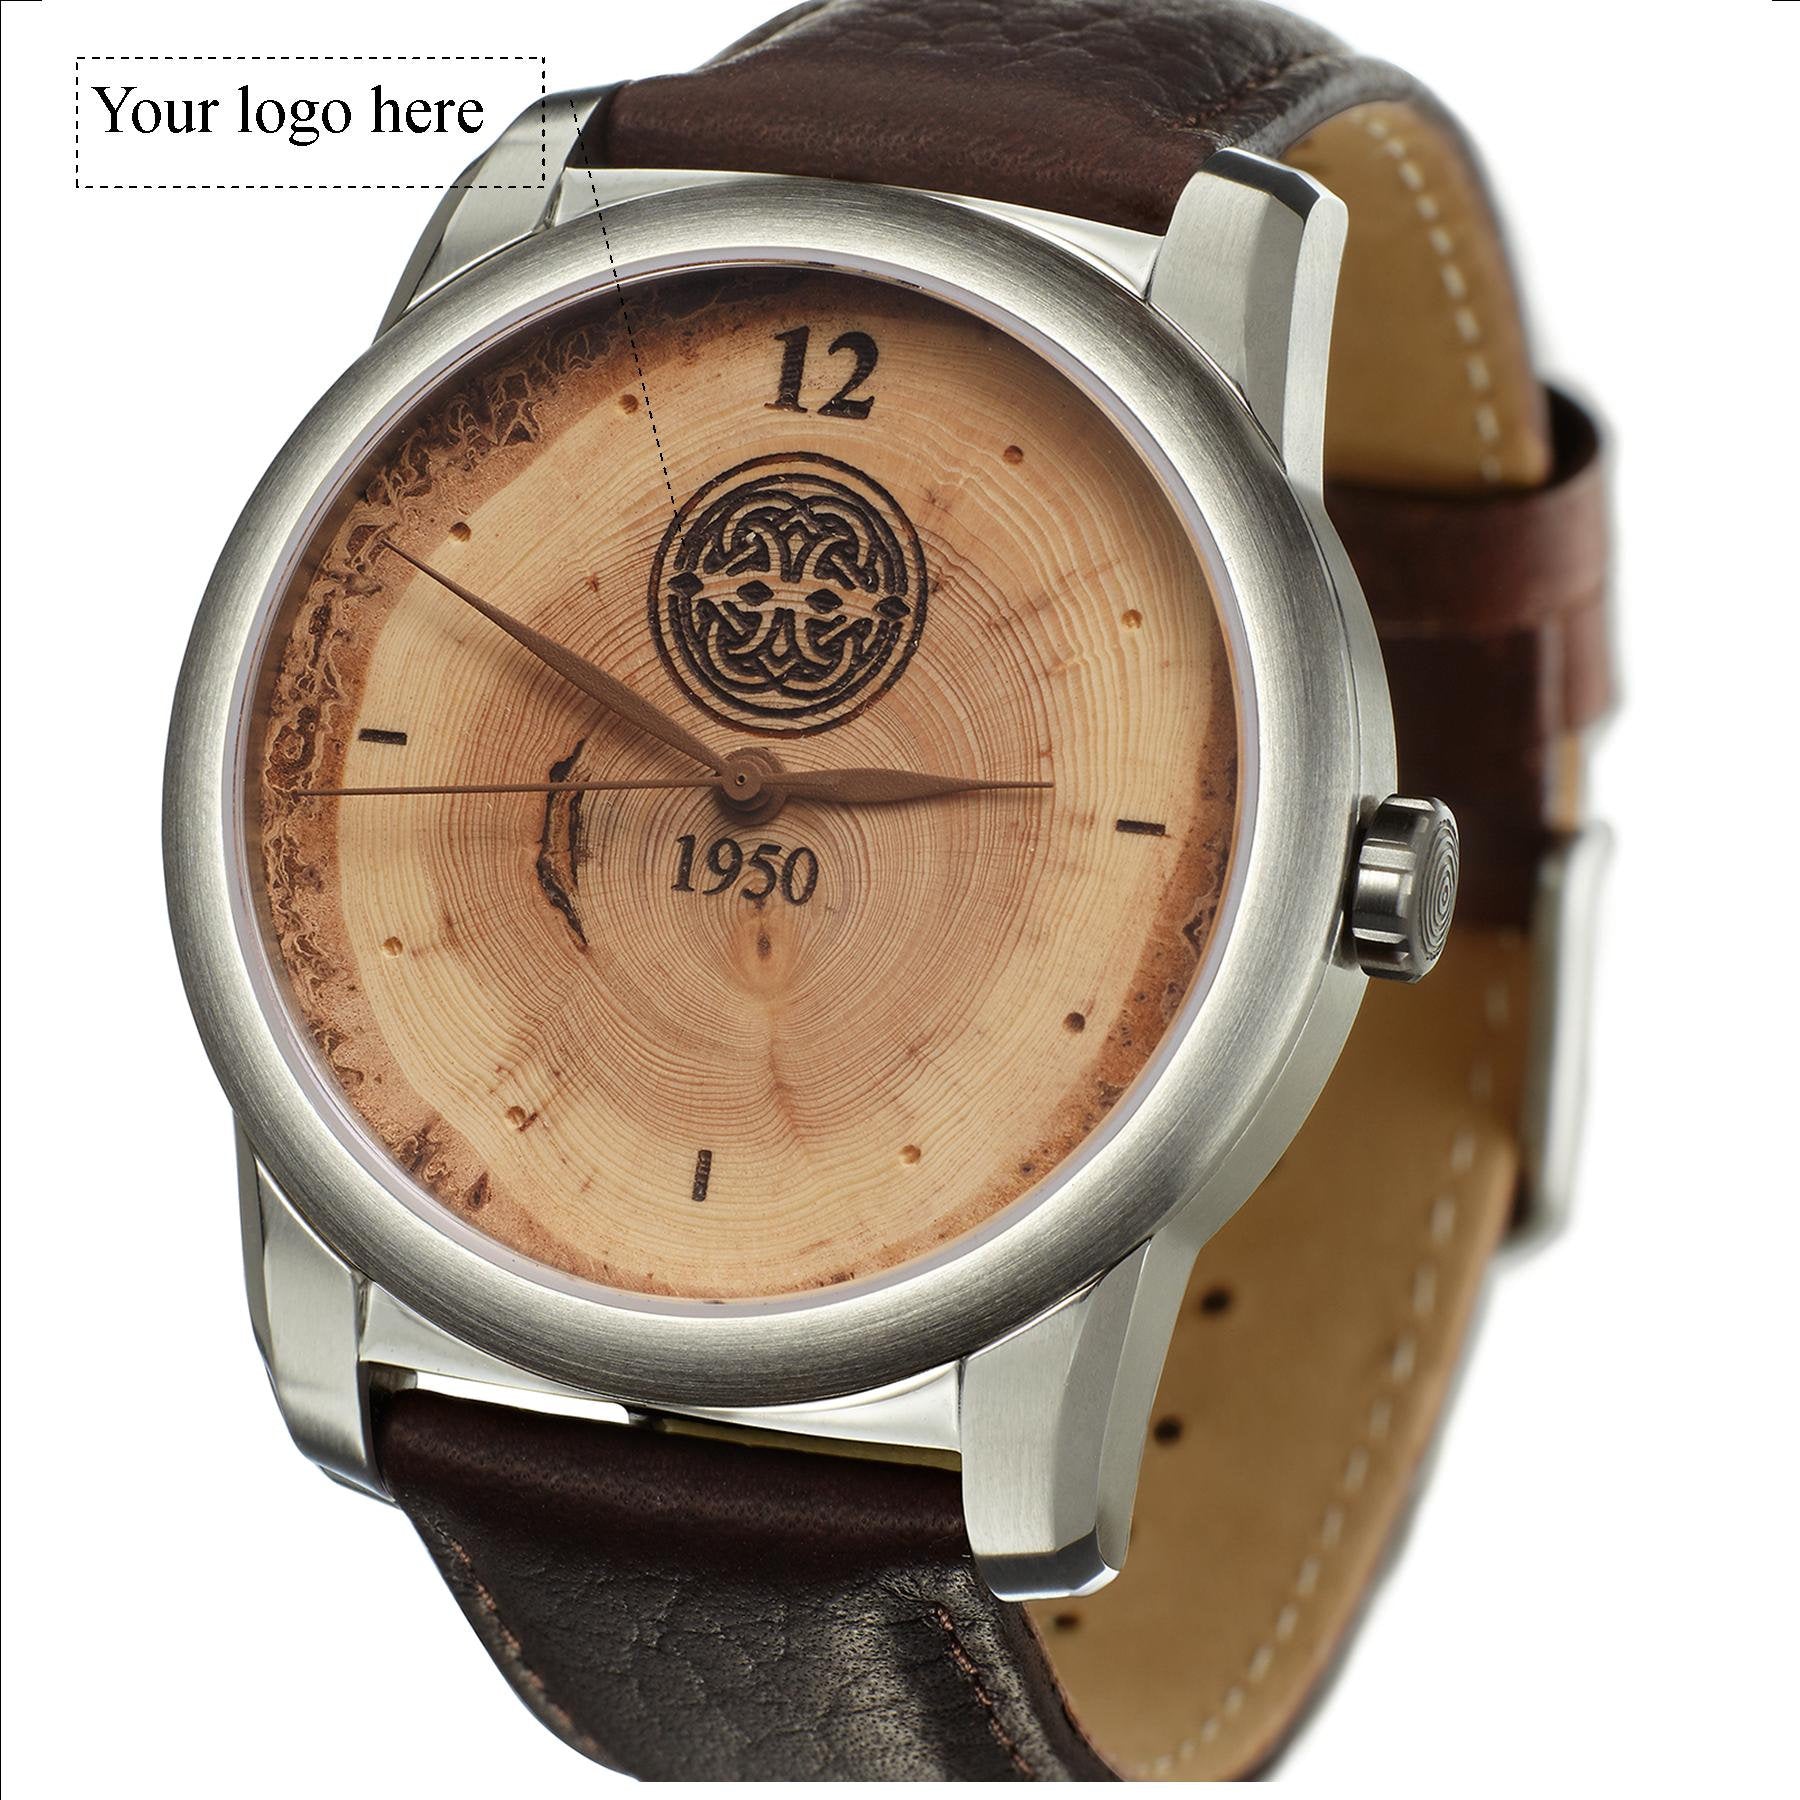 Personalized Watch with Custom Engraved Front Face